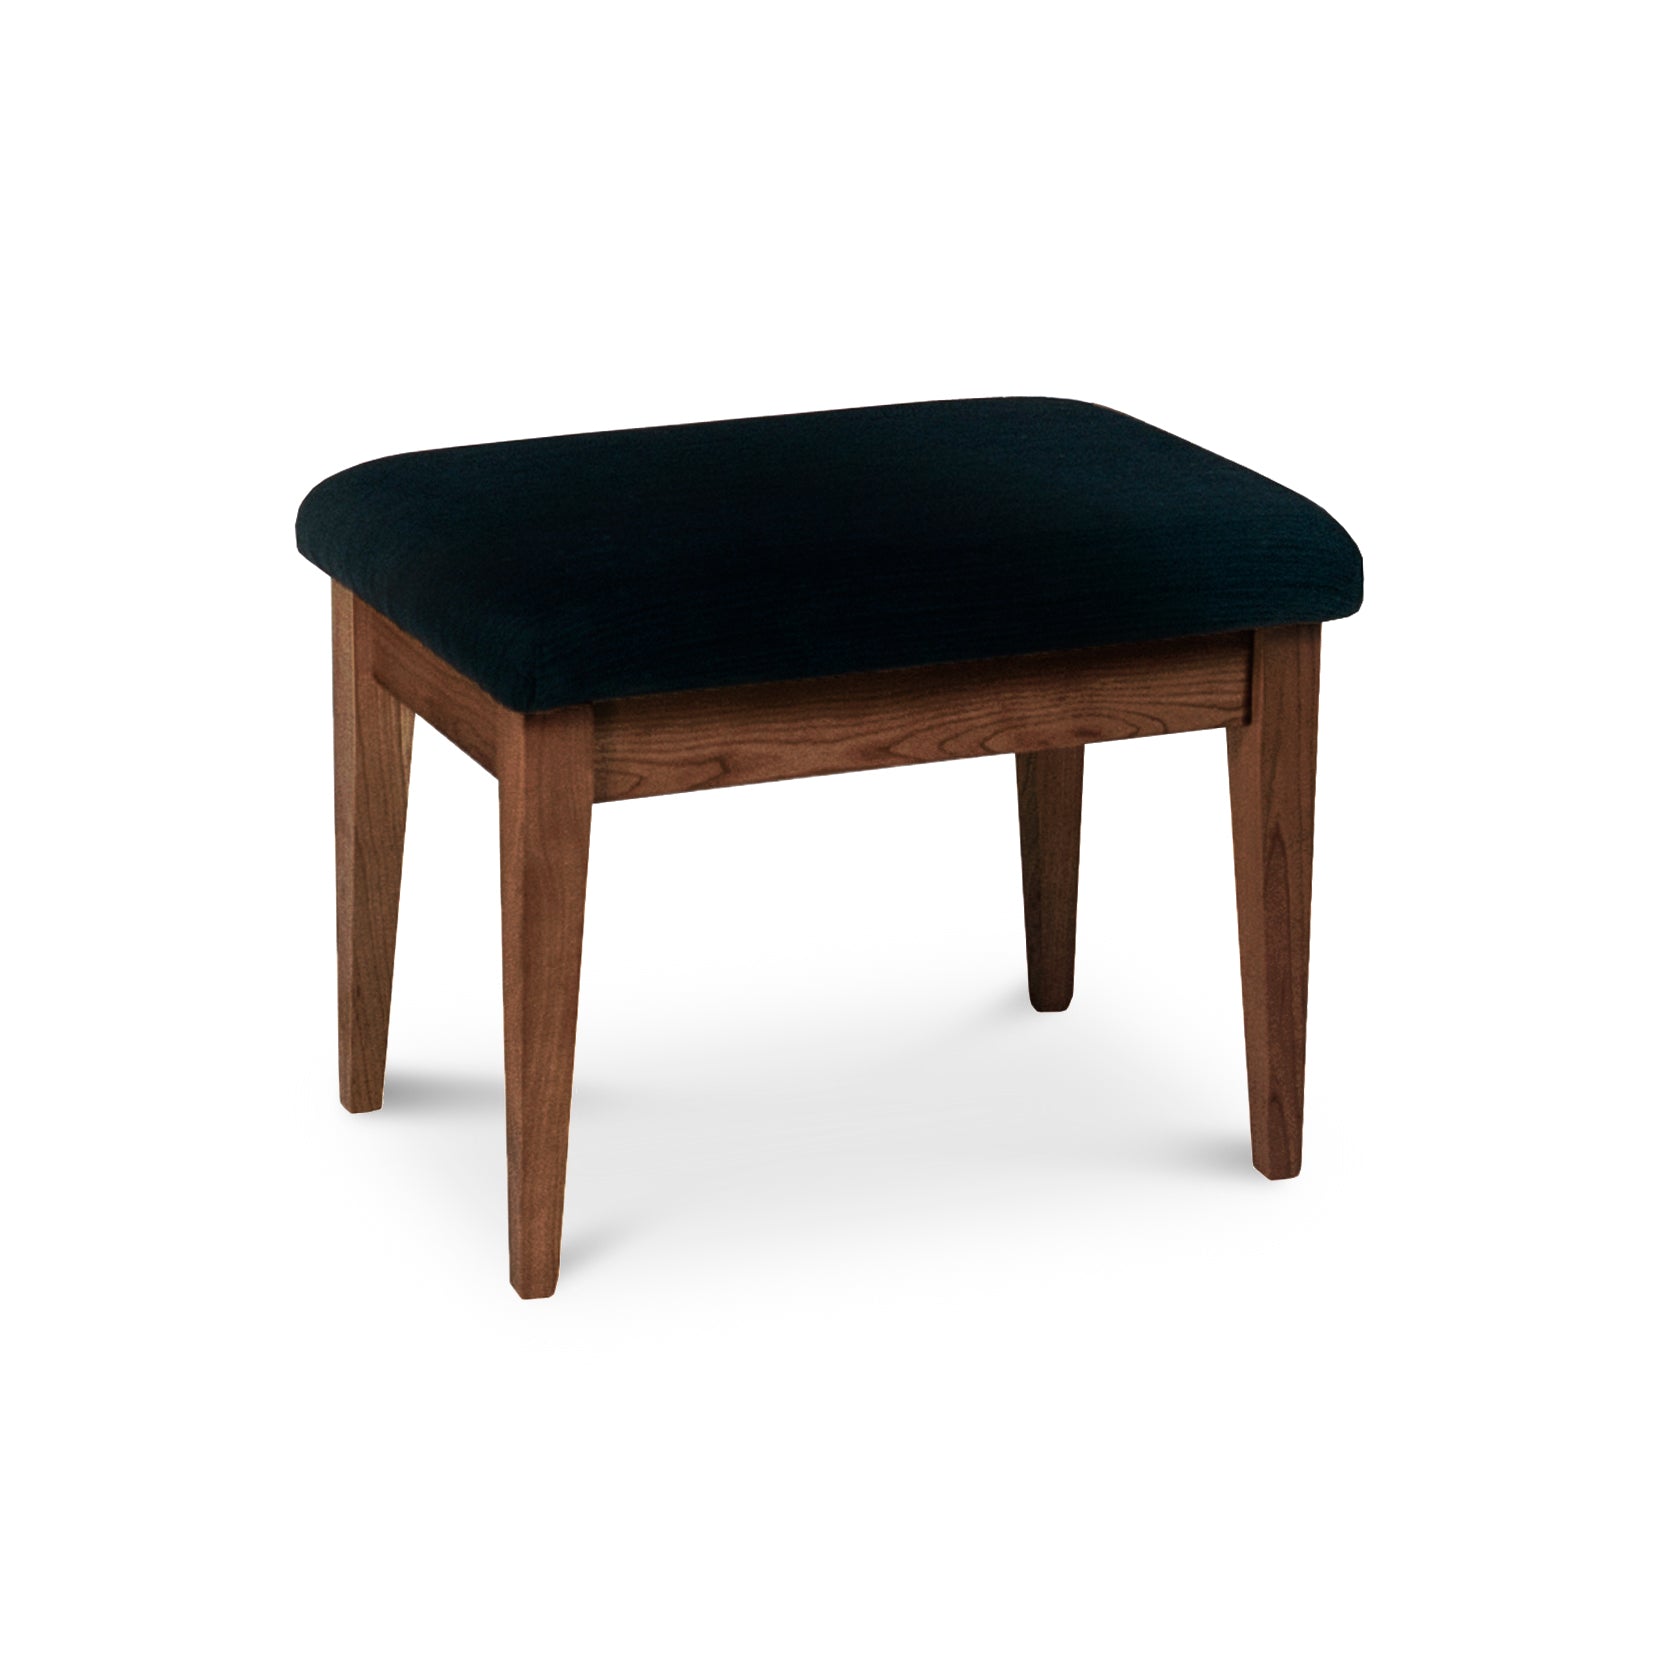 A sustainably harvested wood New England Shaker Dressing Stool, handcrafted with a black velvet upholstered seat by Lyndon Furniture.